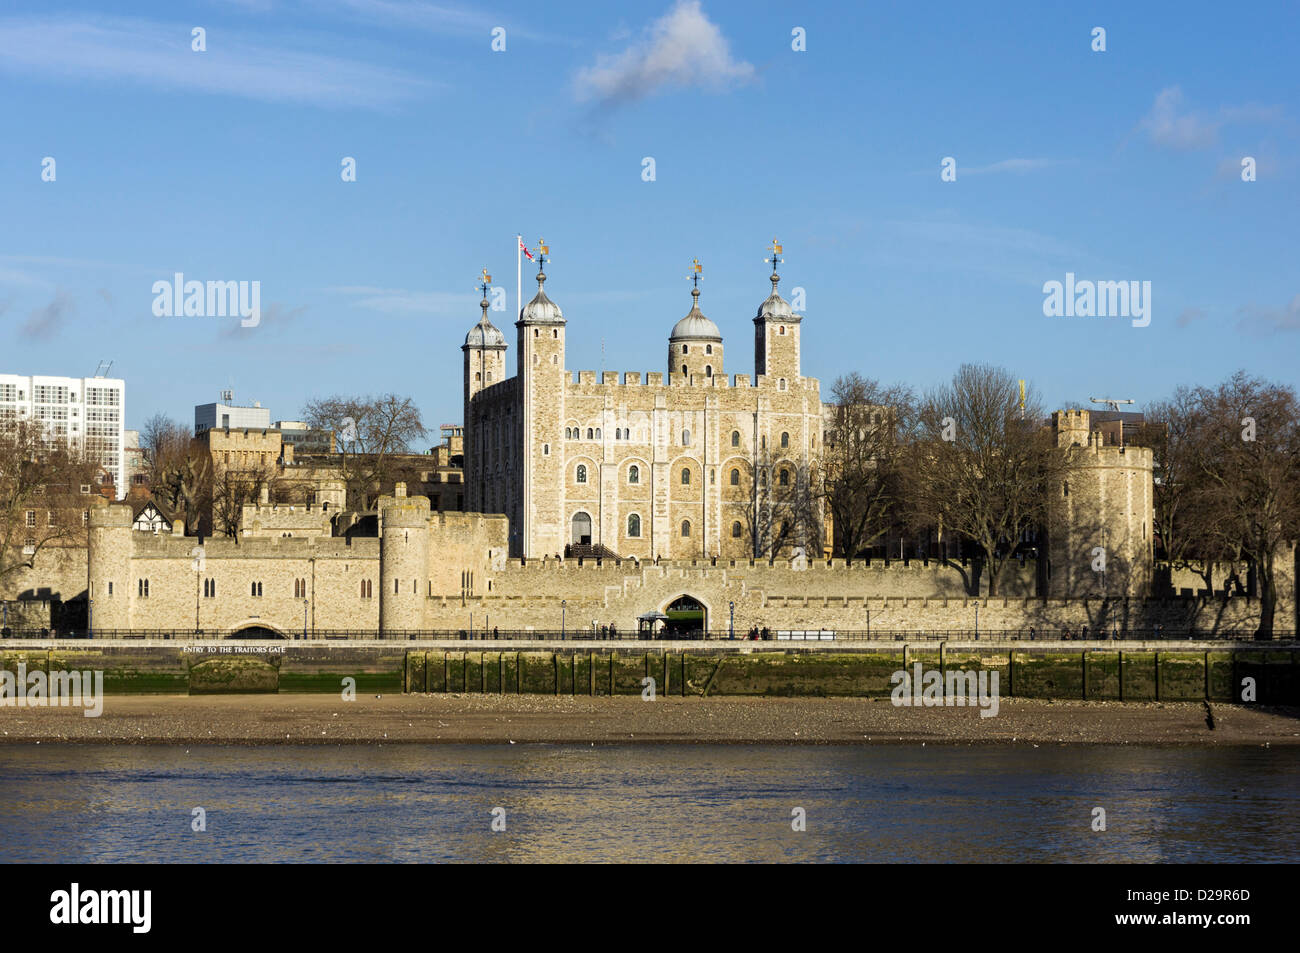 View across the River Thames to the Tower of London, England, UK Stock Photo